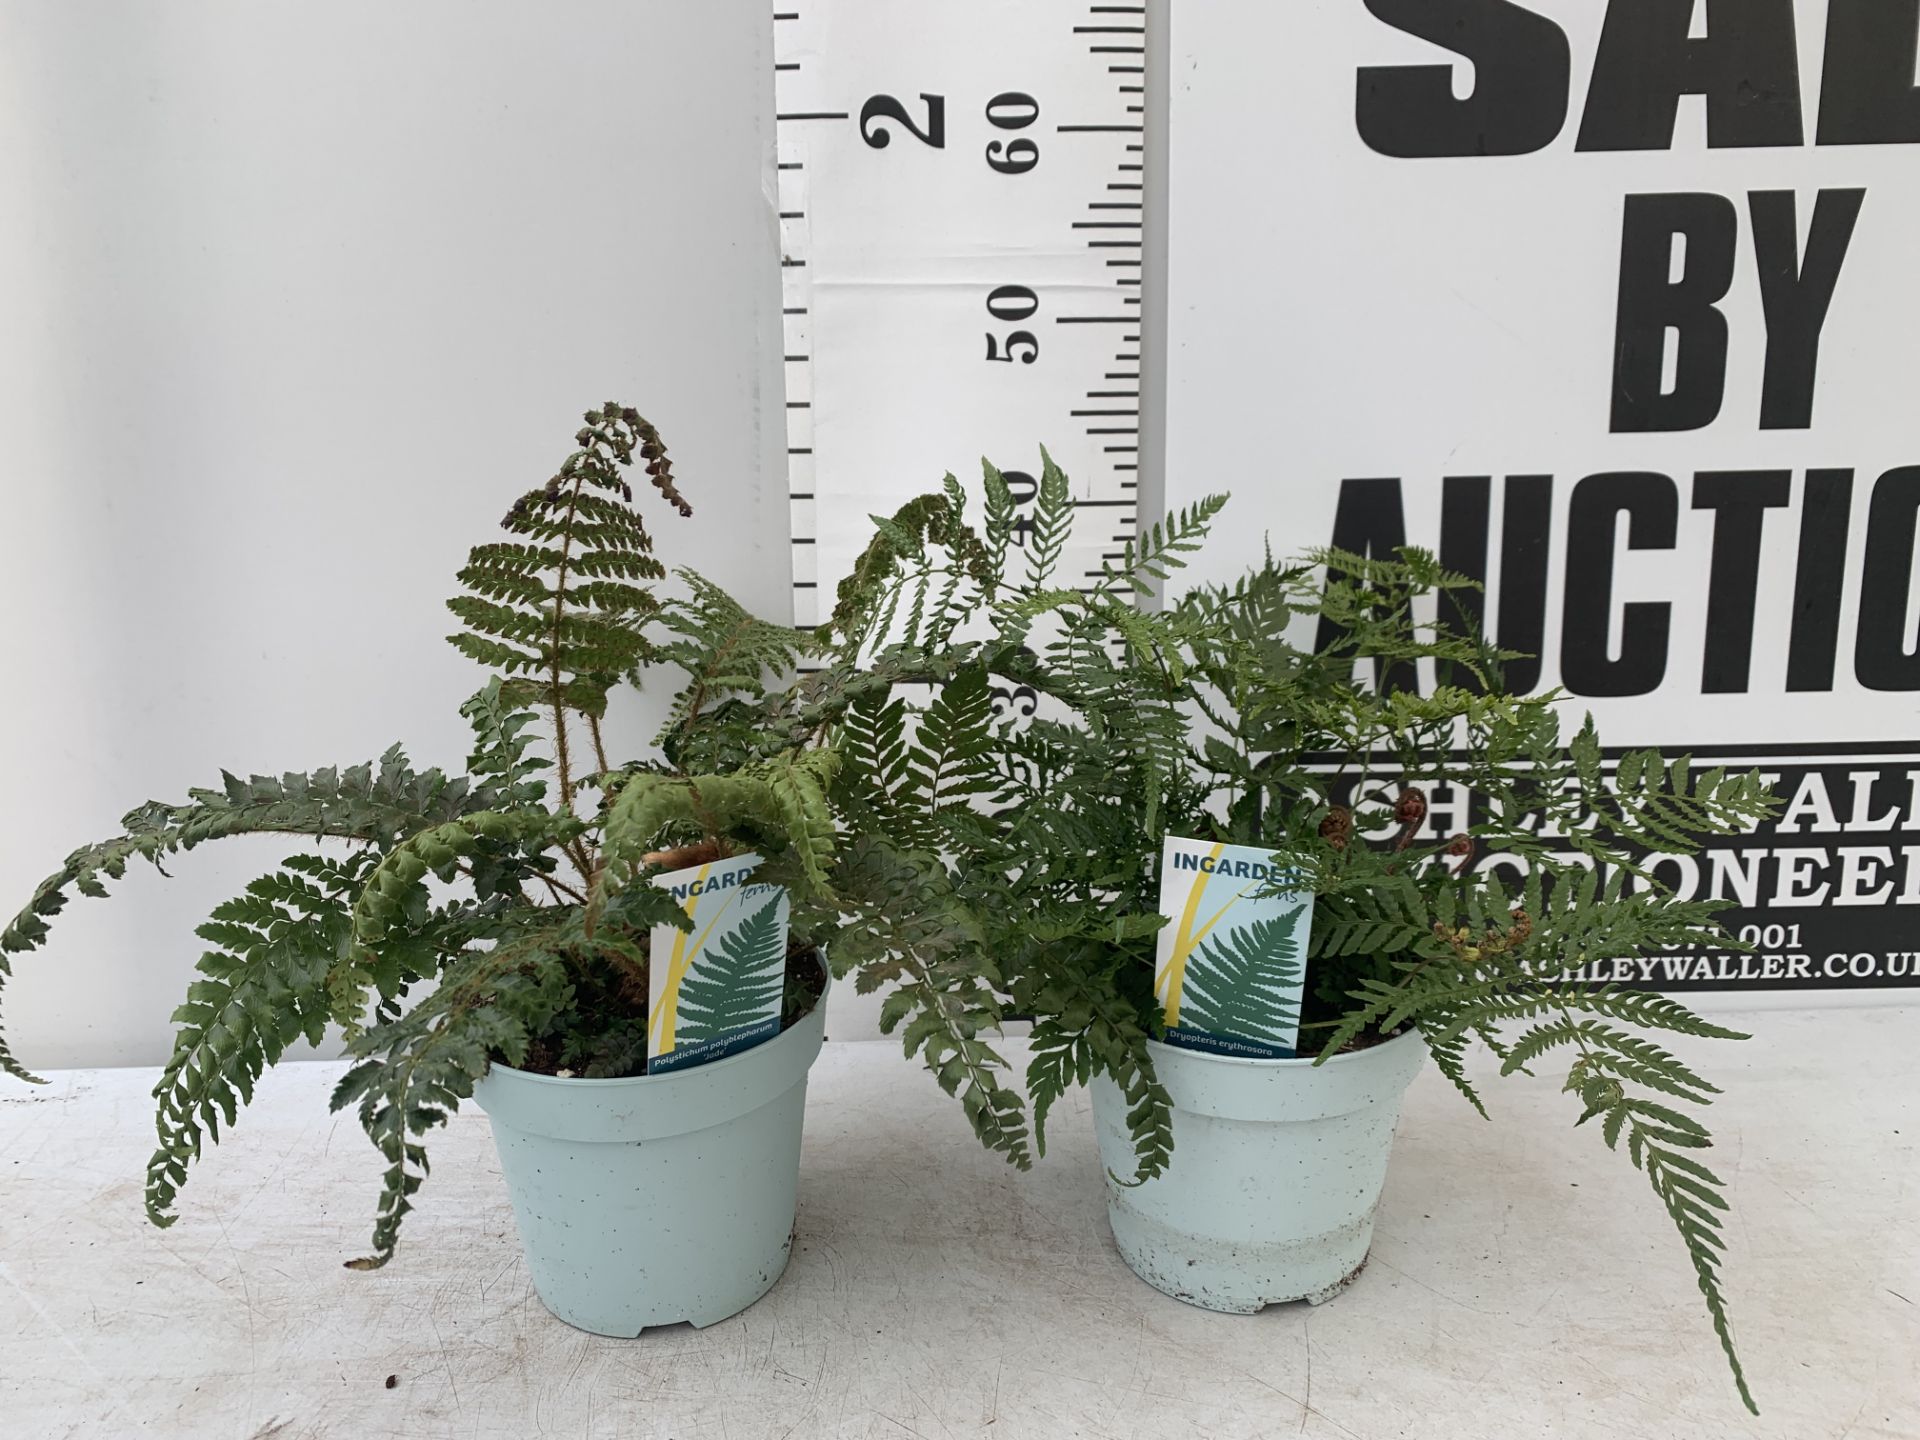 TWO FERNS 'DRYOPTERIS ERYTHROSORA' AND 'POLYSTICHUM POLYBLEPHARUM JADE' IN 2 LTR POTS APPROX 40CM IN